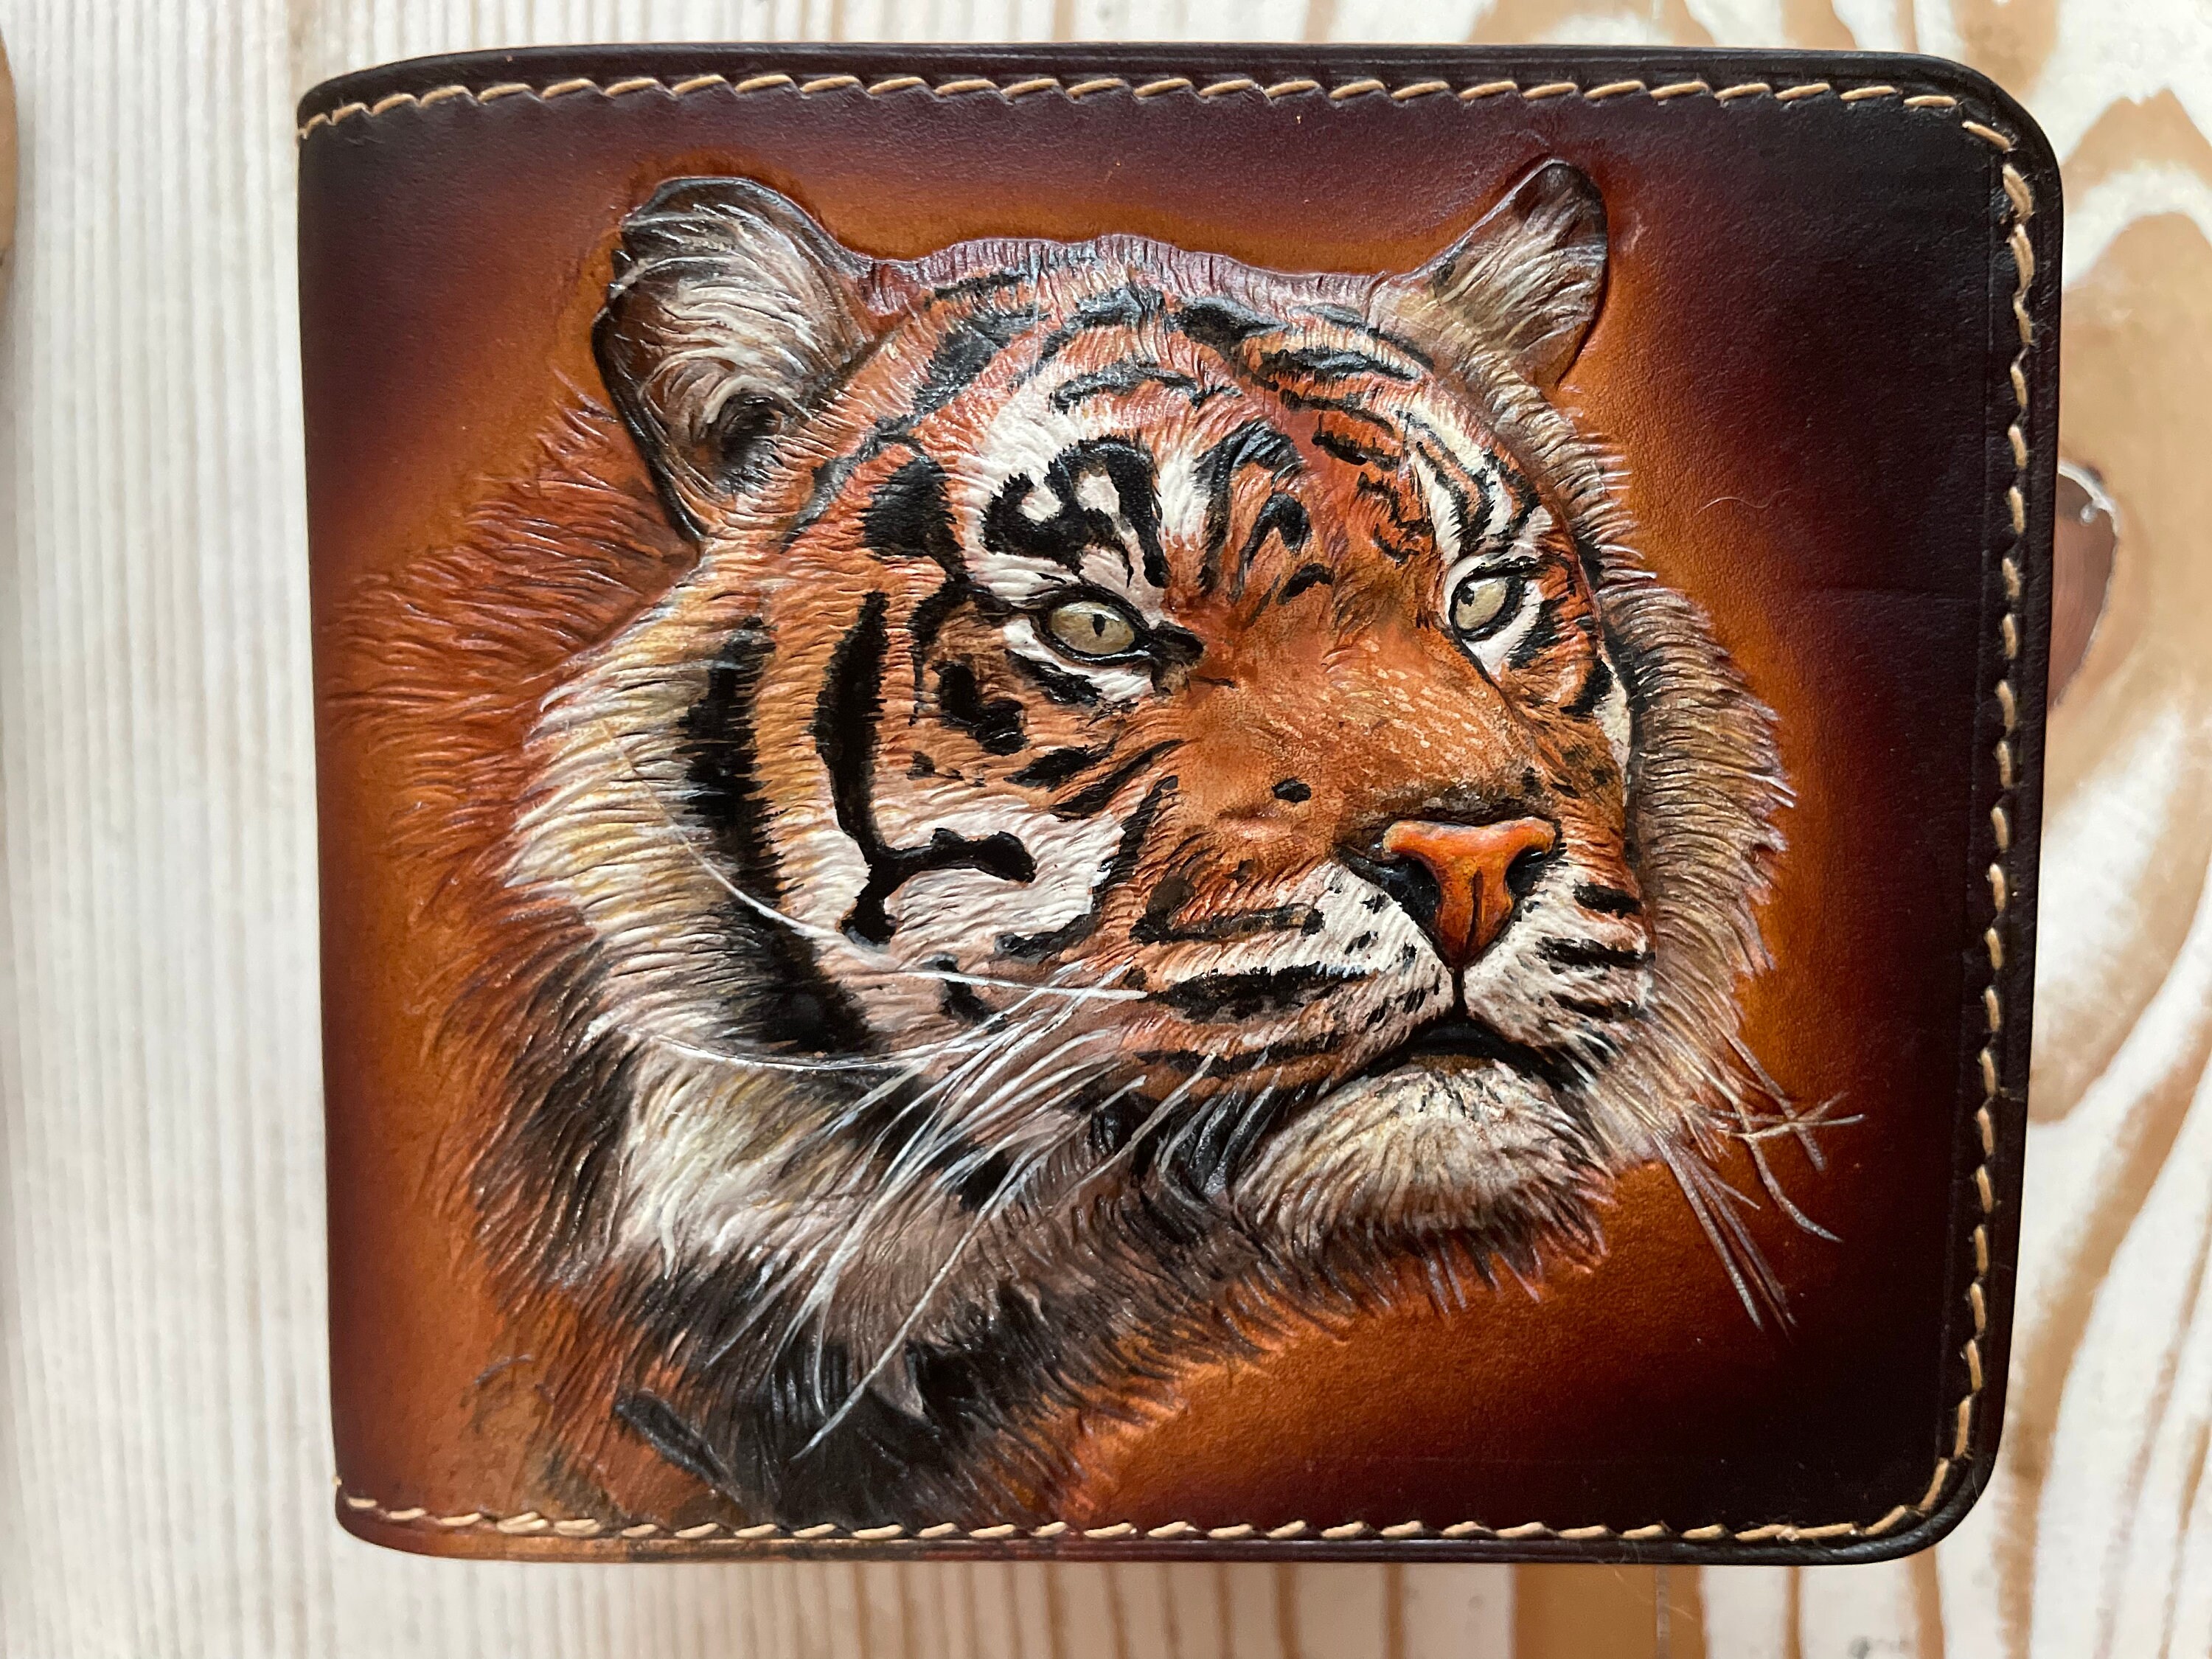  Men's 3D Genuine Leather Wallet, Hand-Carved, Hand-Painted,  Leather Carving, Custom wallet, Personalized wallet, Sea wallet, Marine,  Blue Whale : Handmade Products